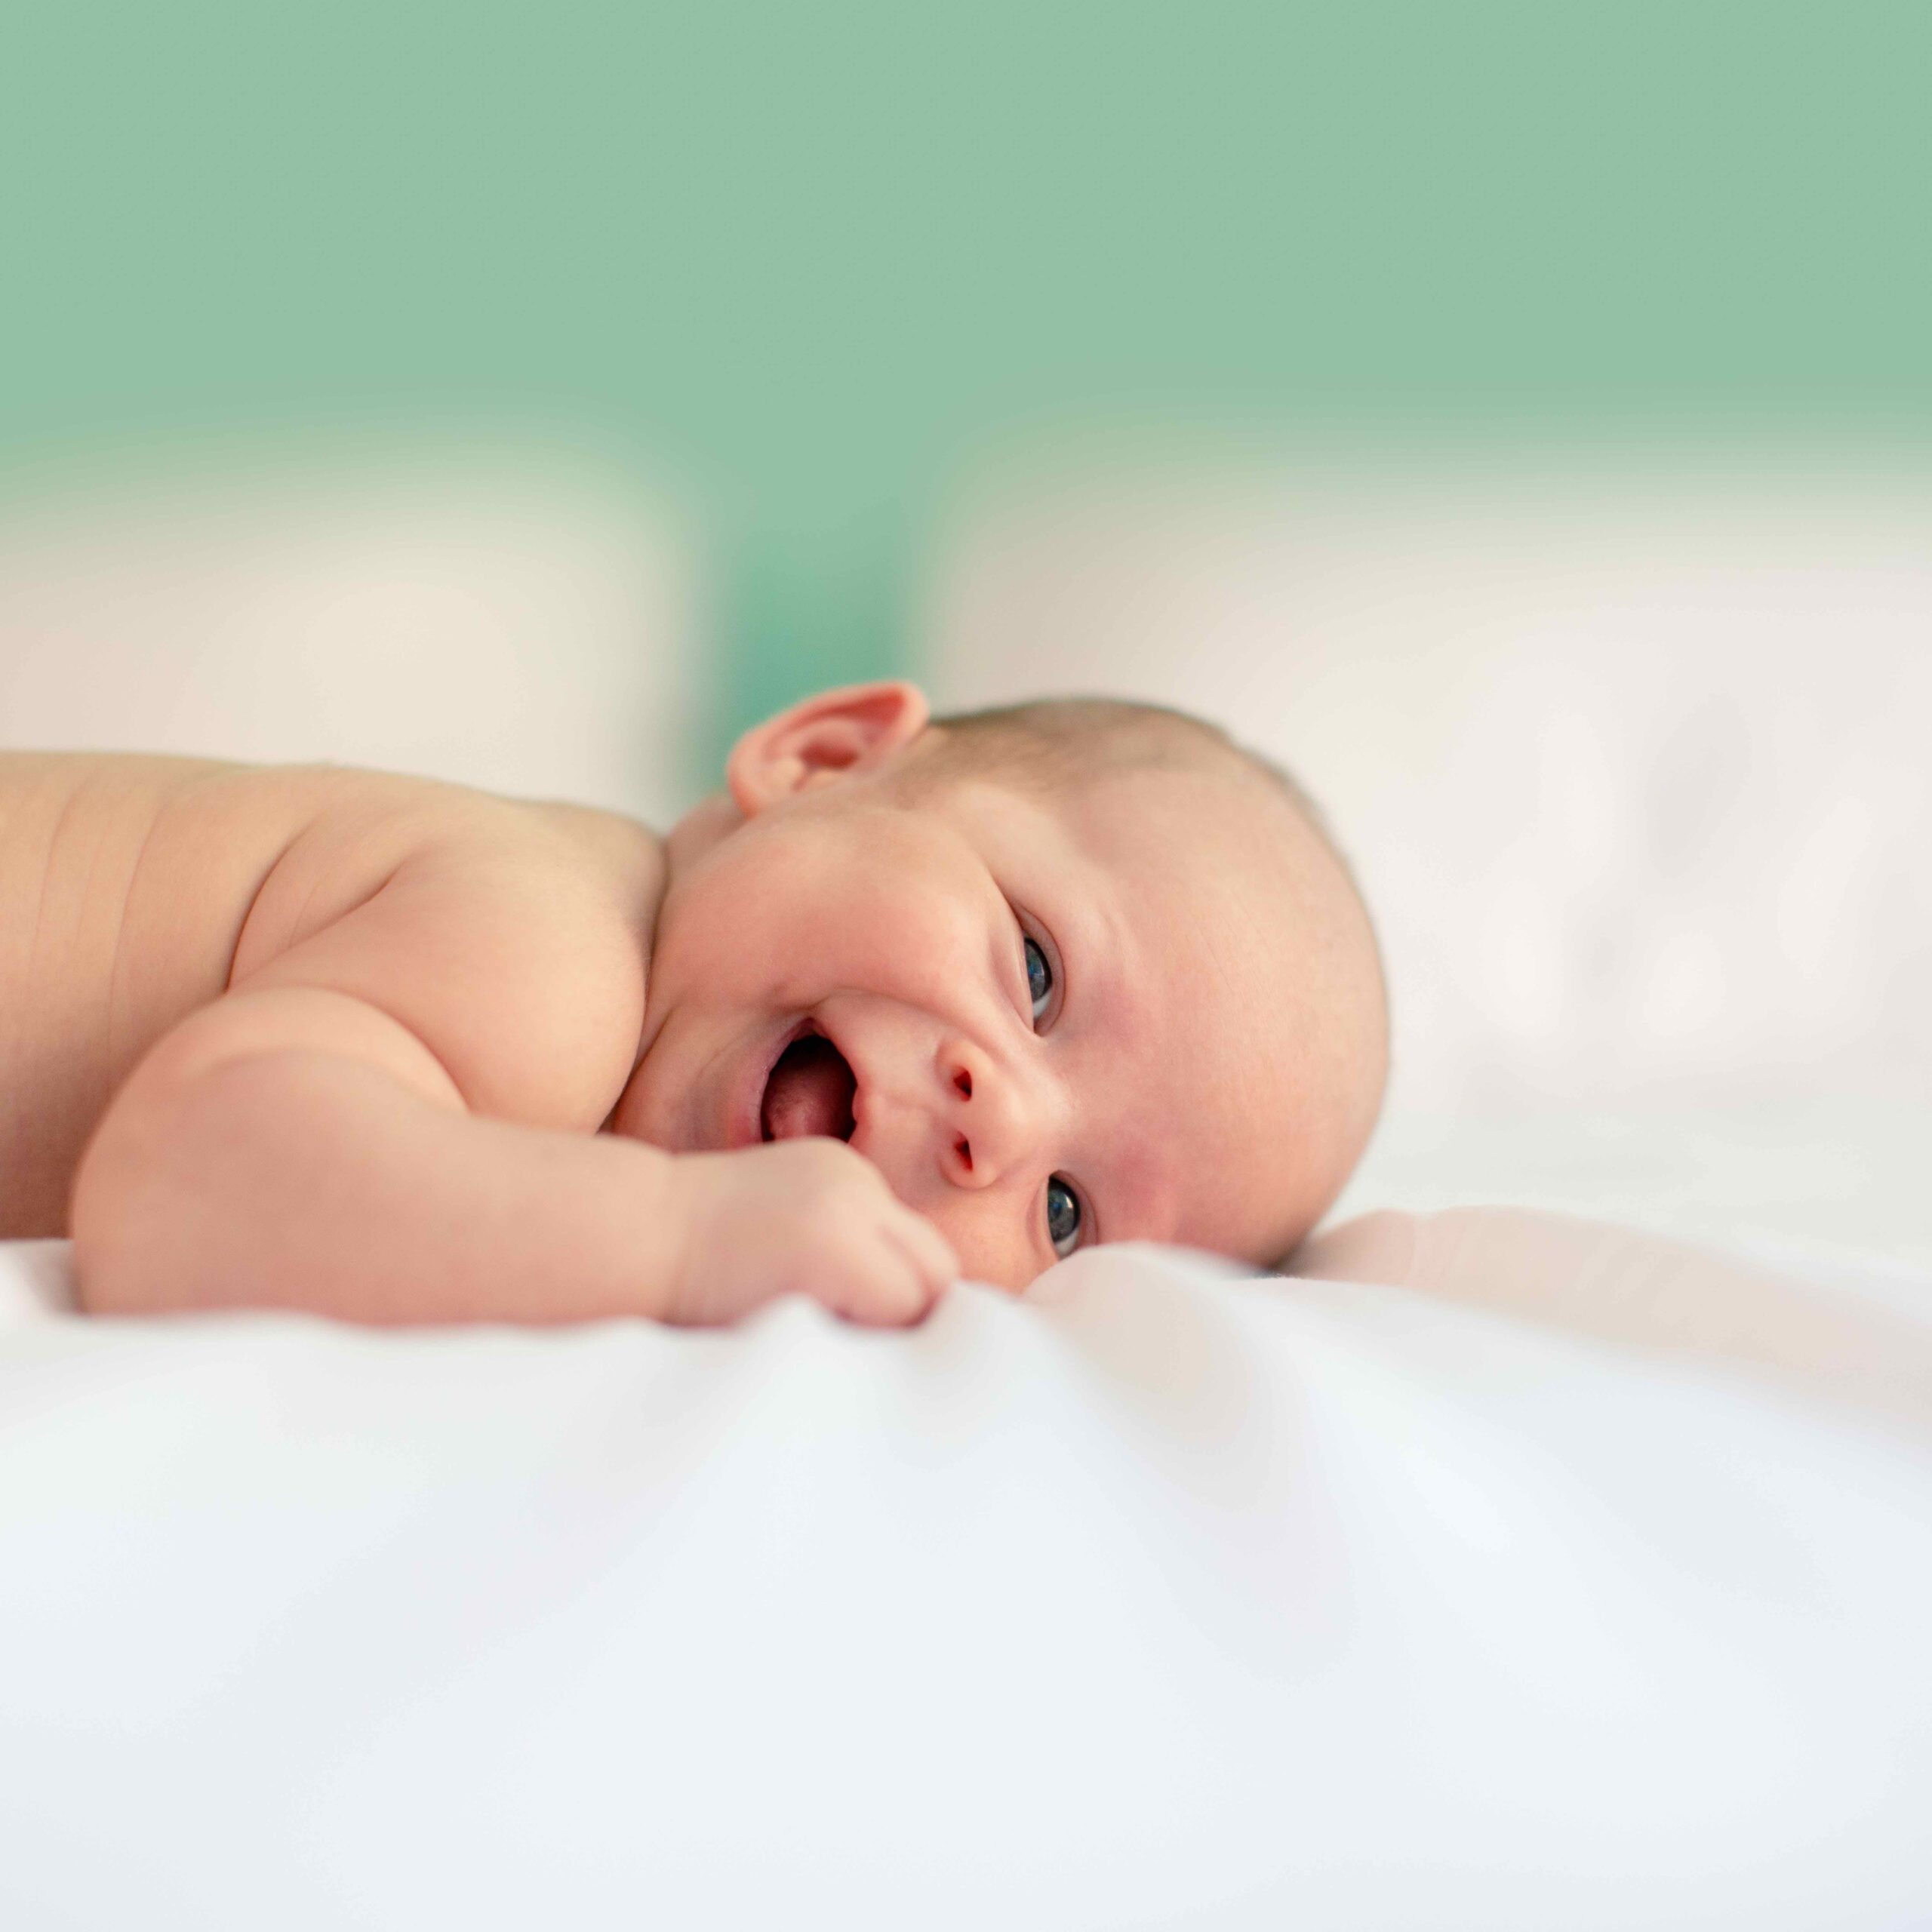 Baby Care 101: Keeping a Newborn Comfortable